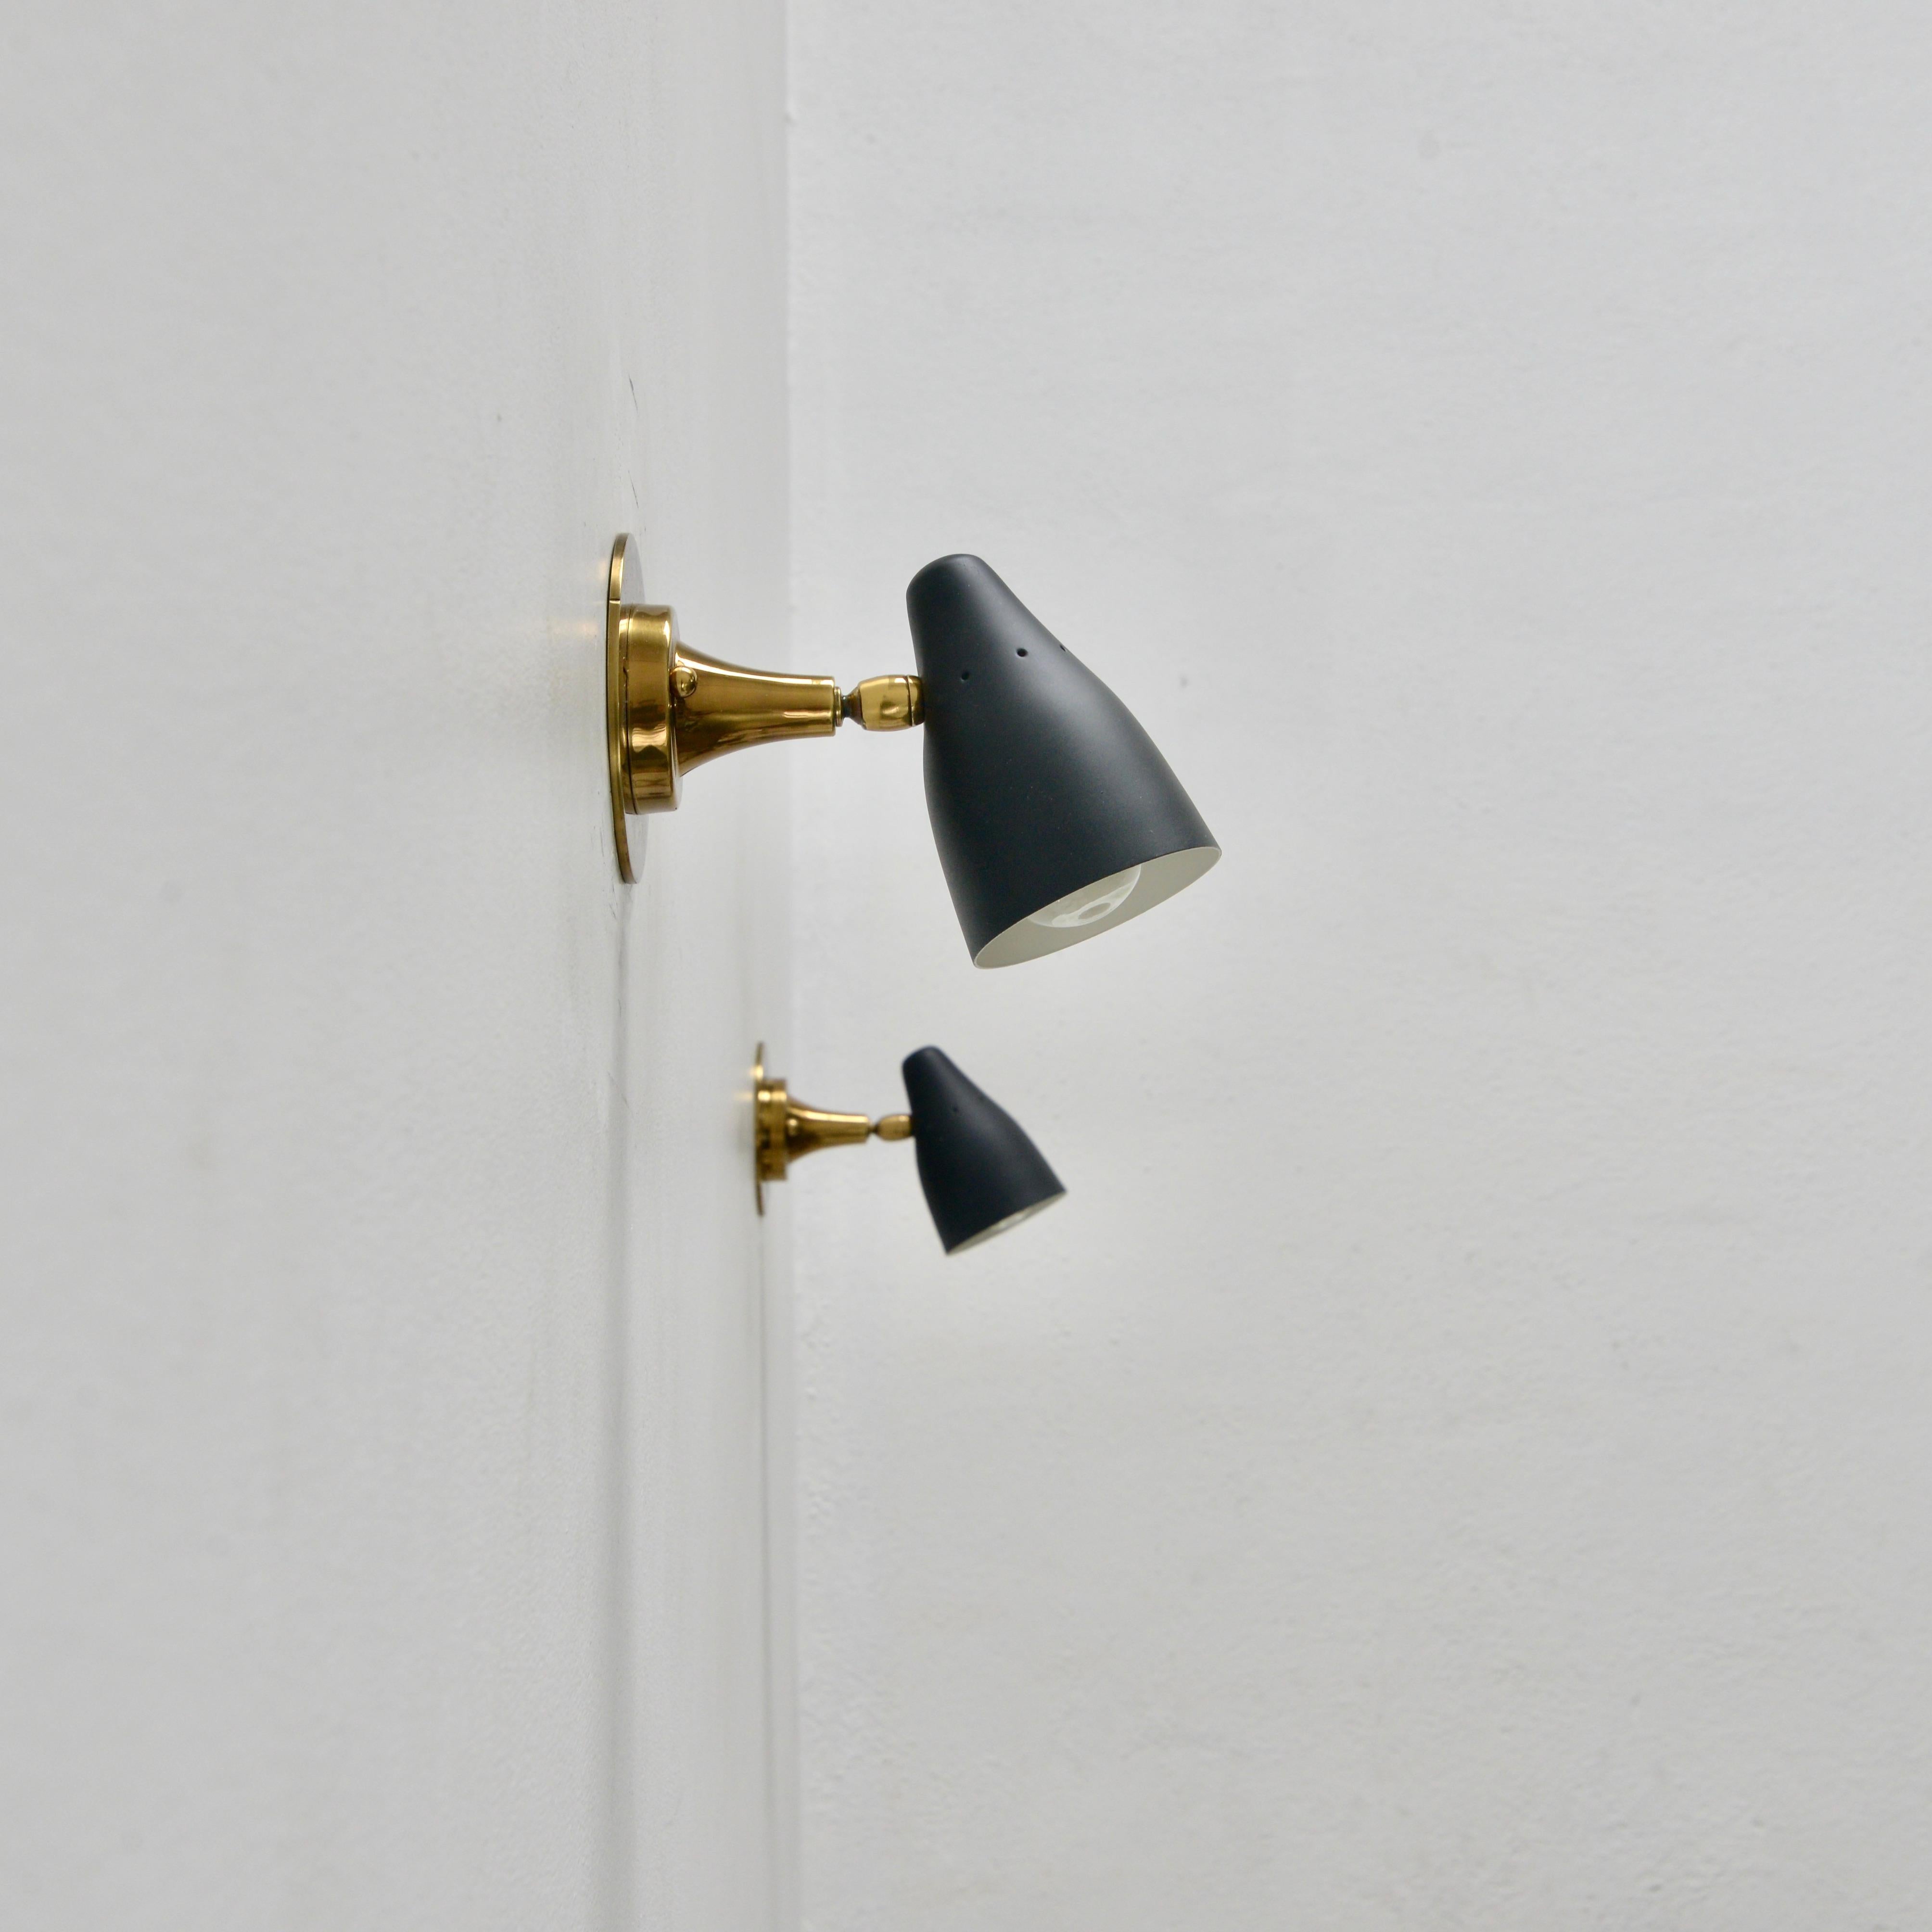 Pair of black and brass directional Italian sconces by Ostuni from the 1950s. Partially restored. (1) E12 candelabra based socket per sconce. Wired for use in the US. Lightbulbs included with order. Sold as a pair.
Measurements:
Height 5”
Depth